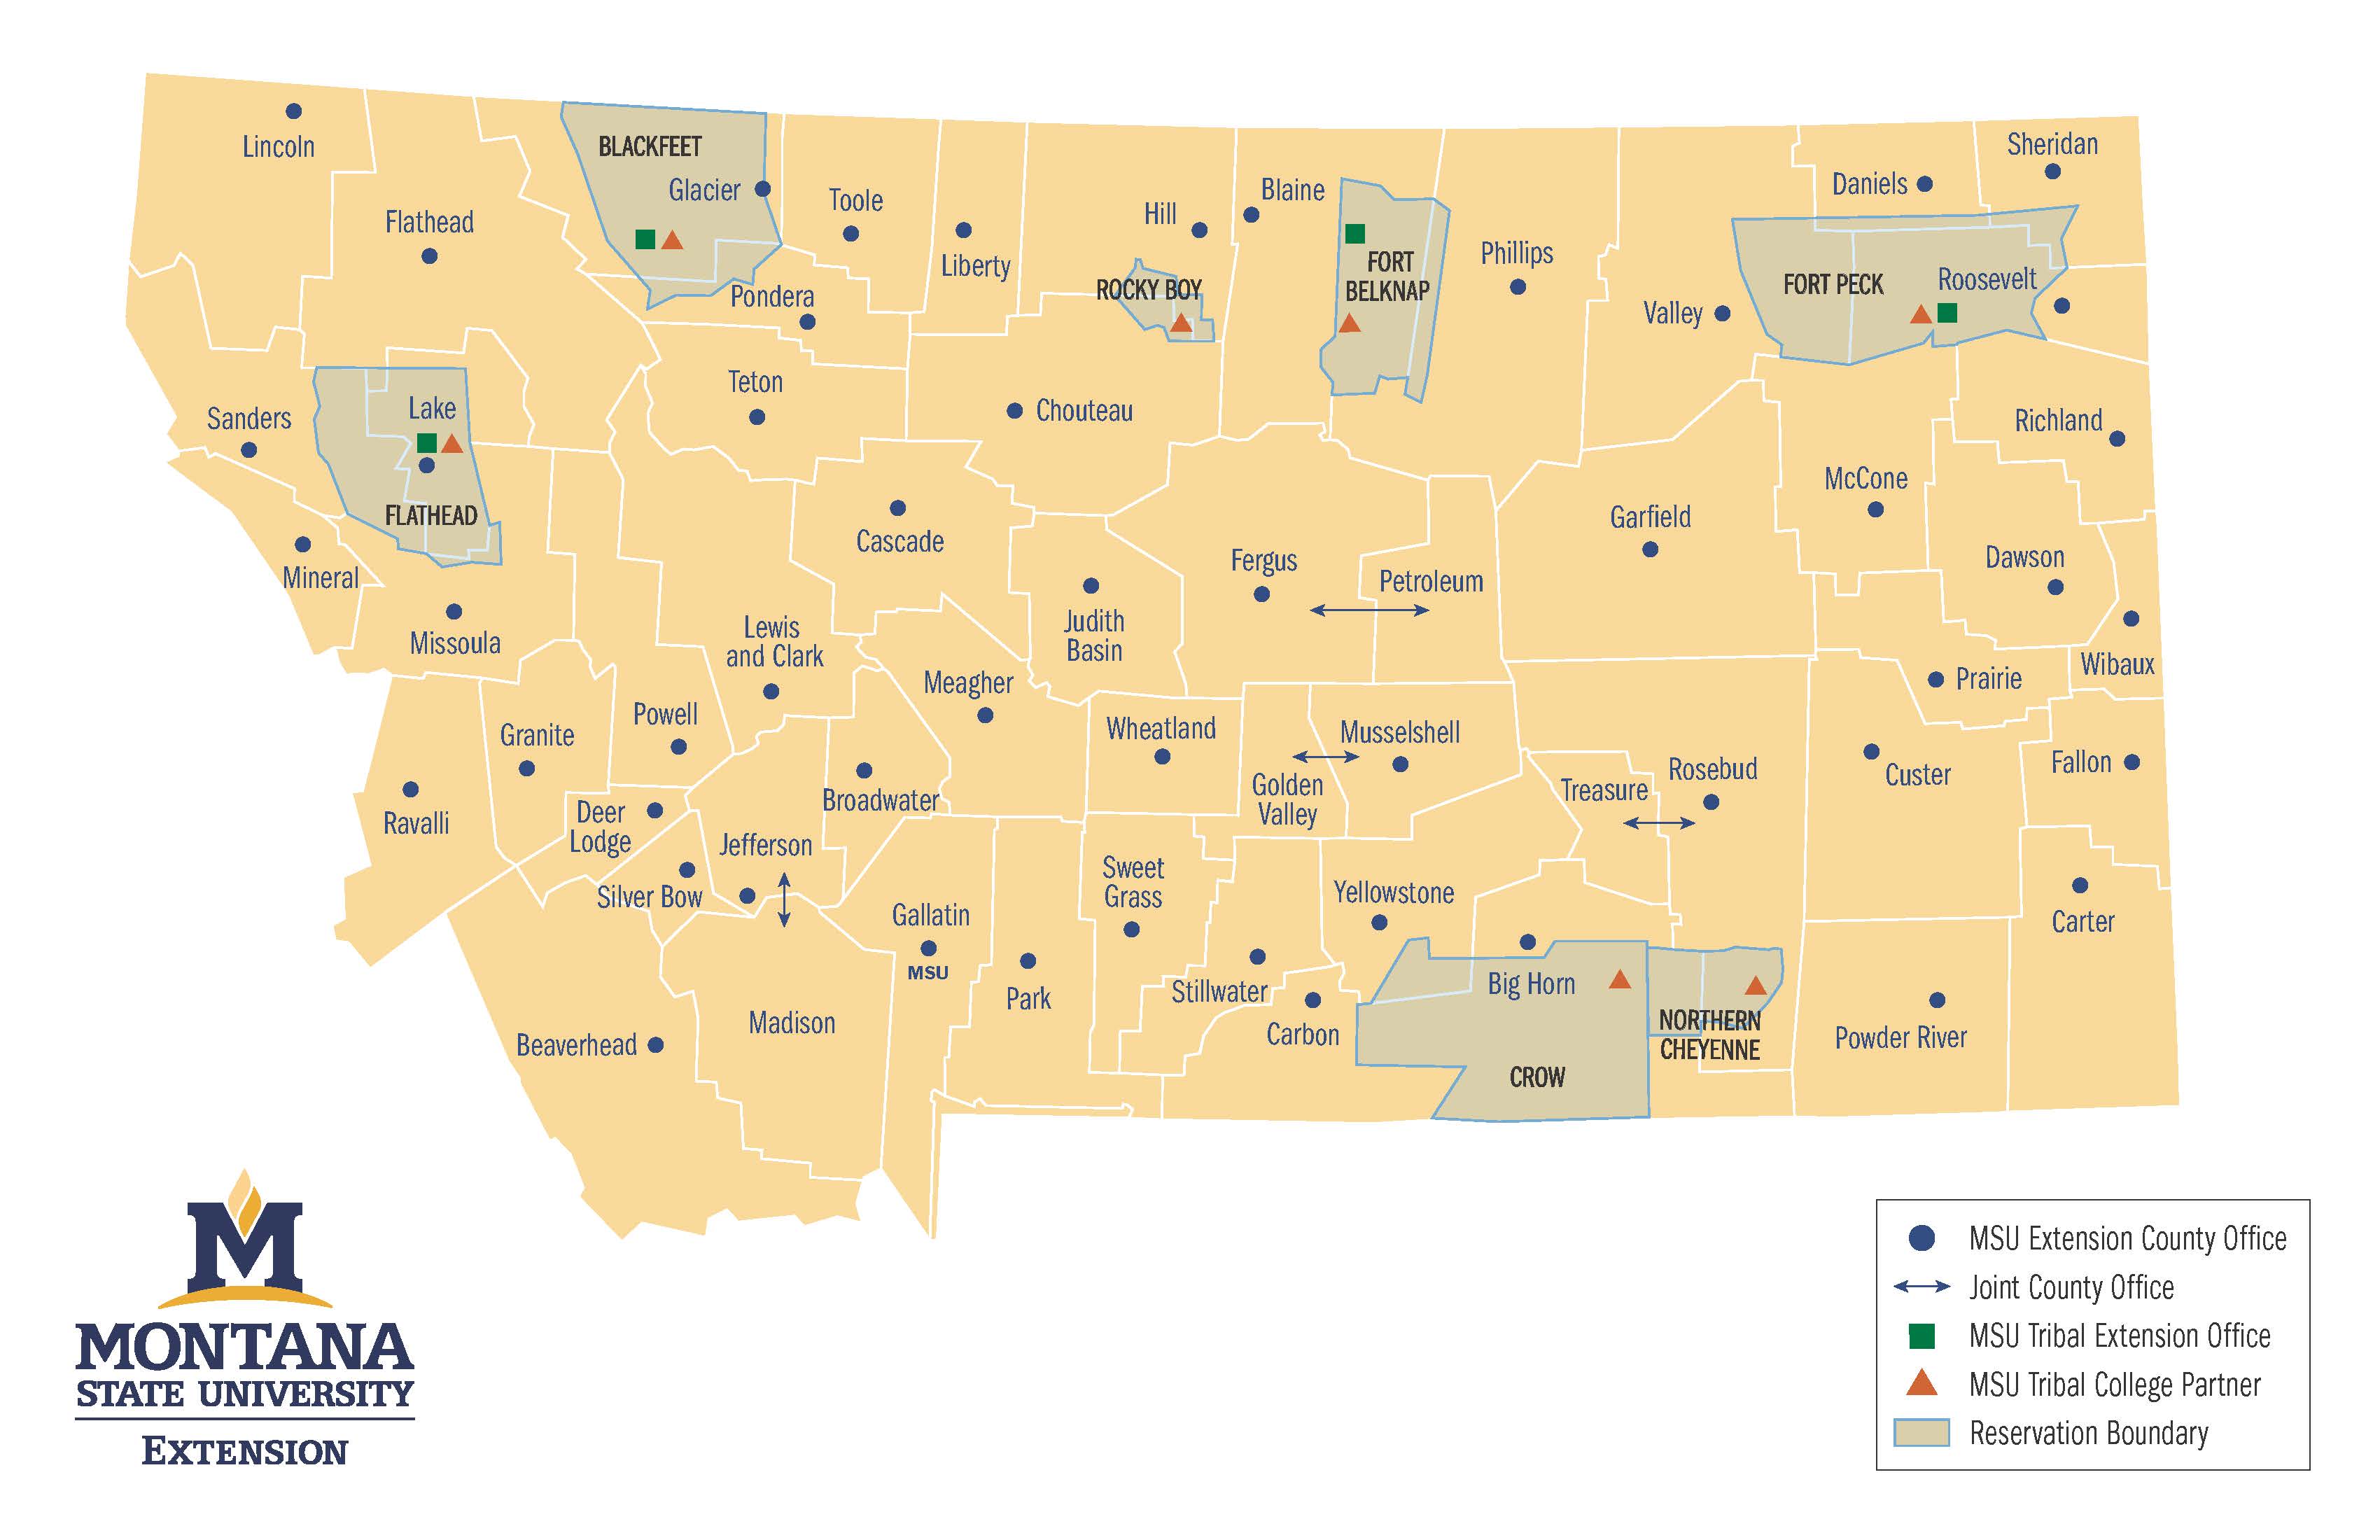 MSU Extension Map - State of Montana with county office locations listed